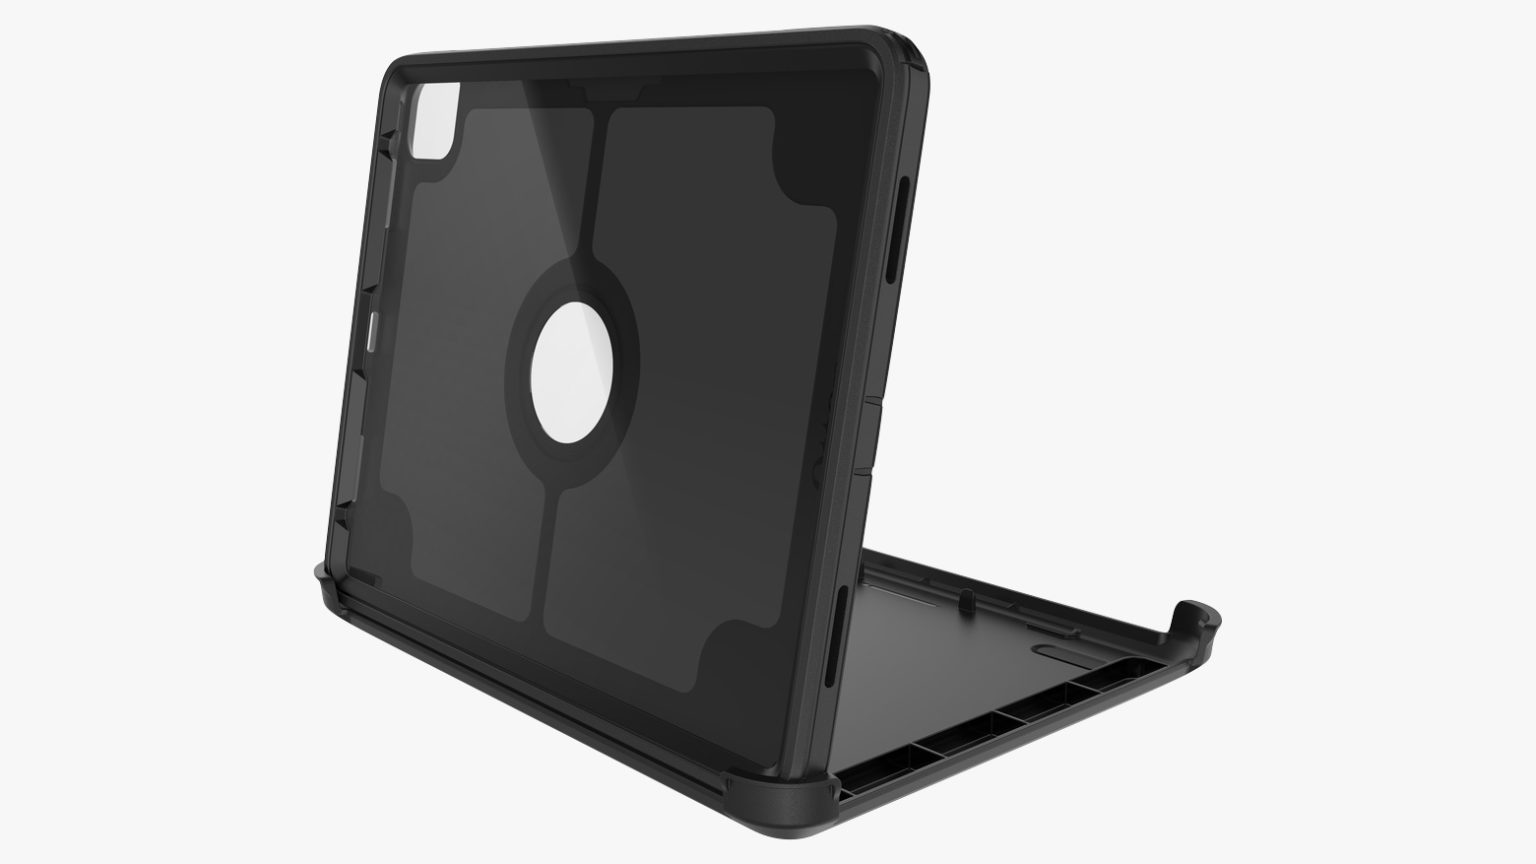 OtterBox Defender Series for 2020 iPad Pro brings plenty of protection.